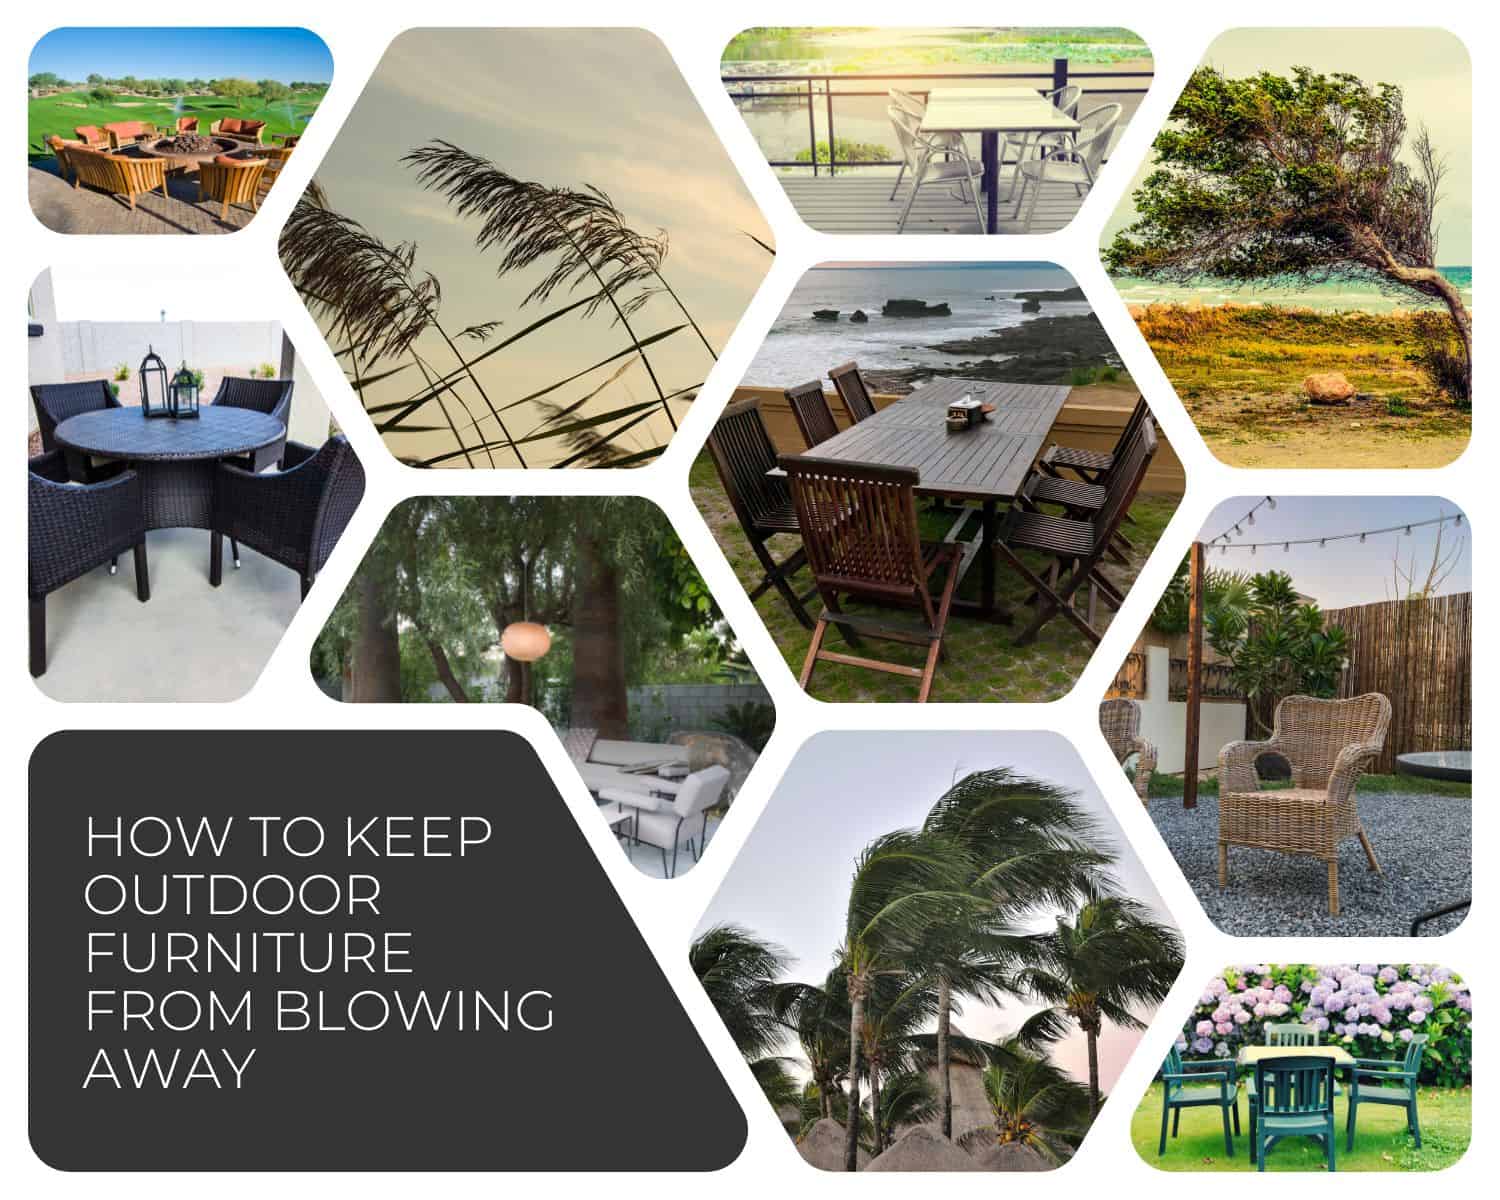 How To Keep Outdoor Furniture From Blowing Away